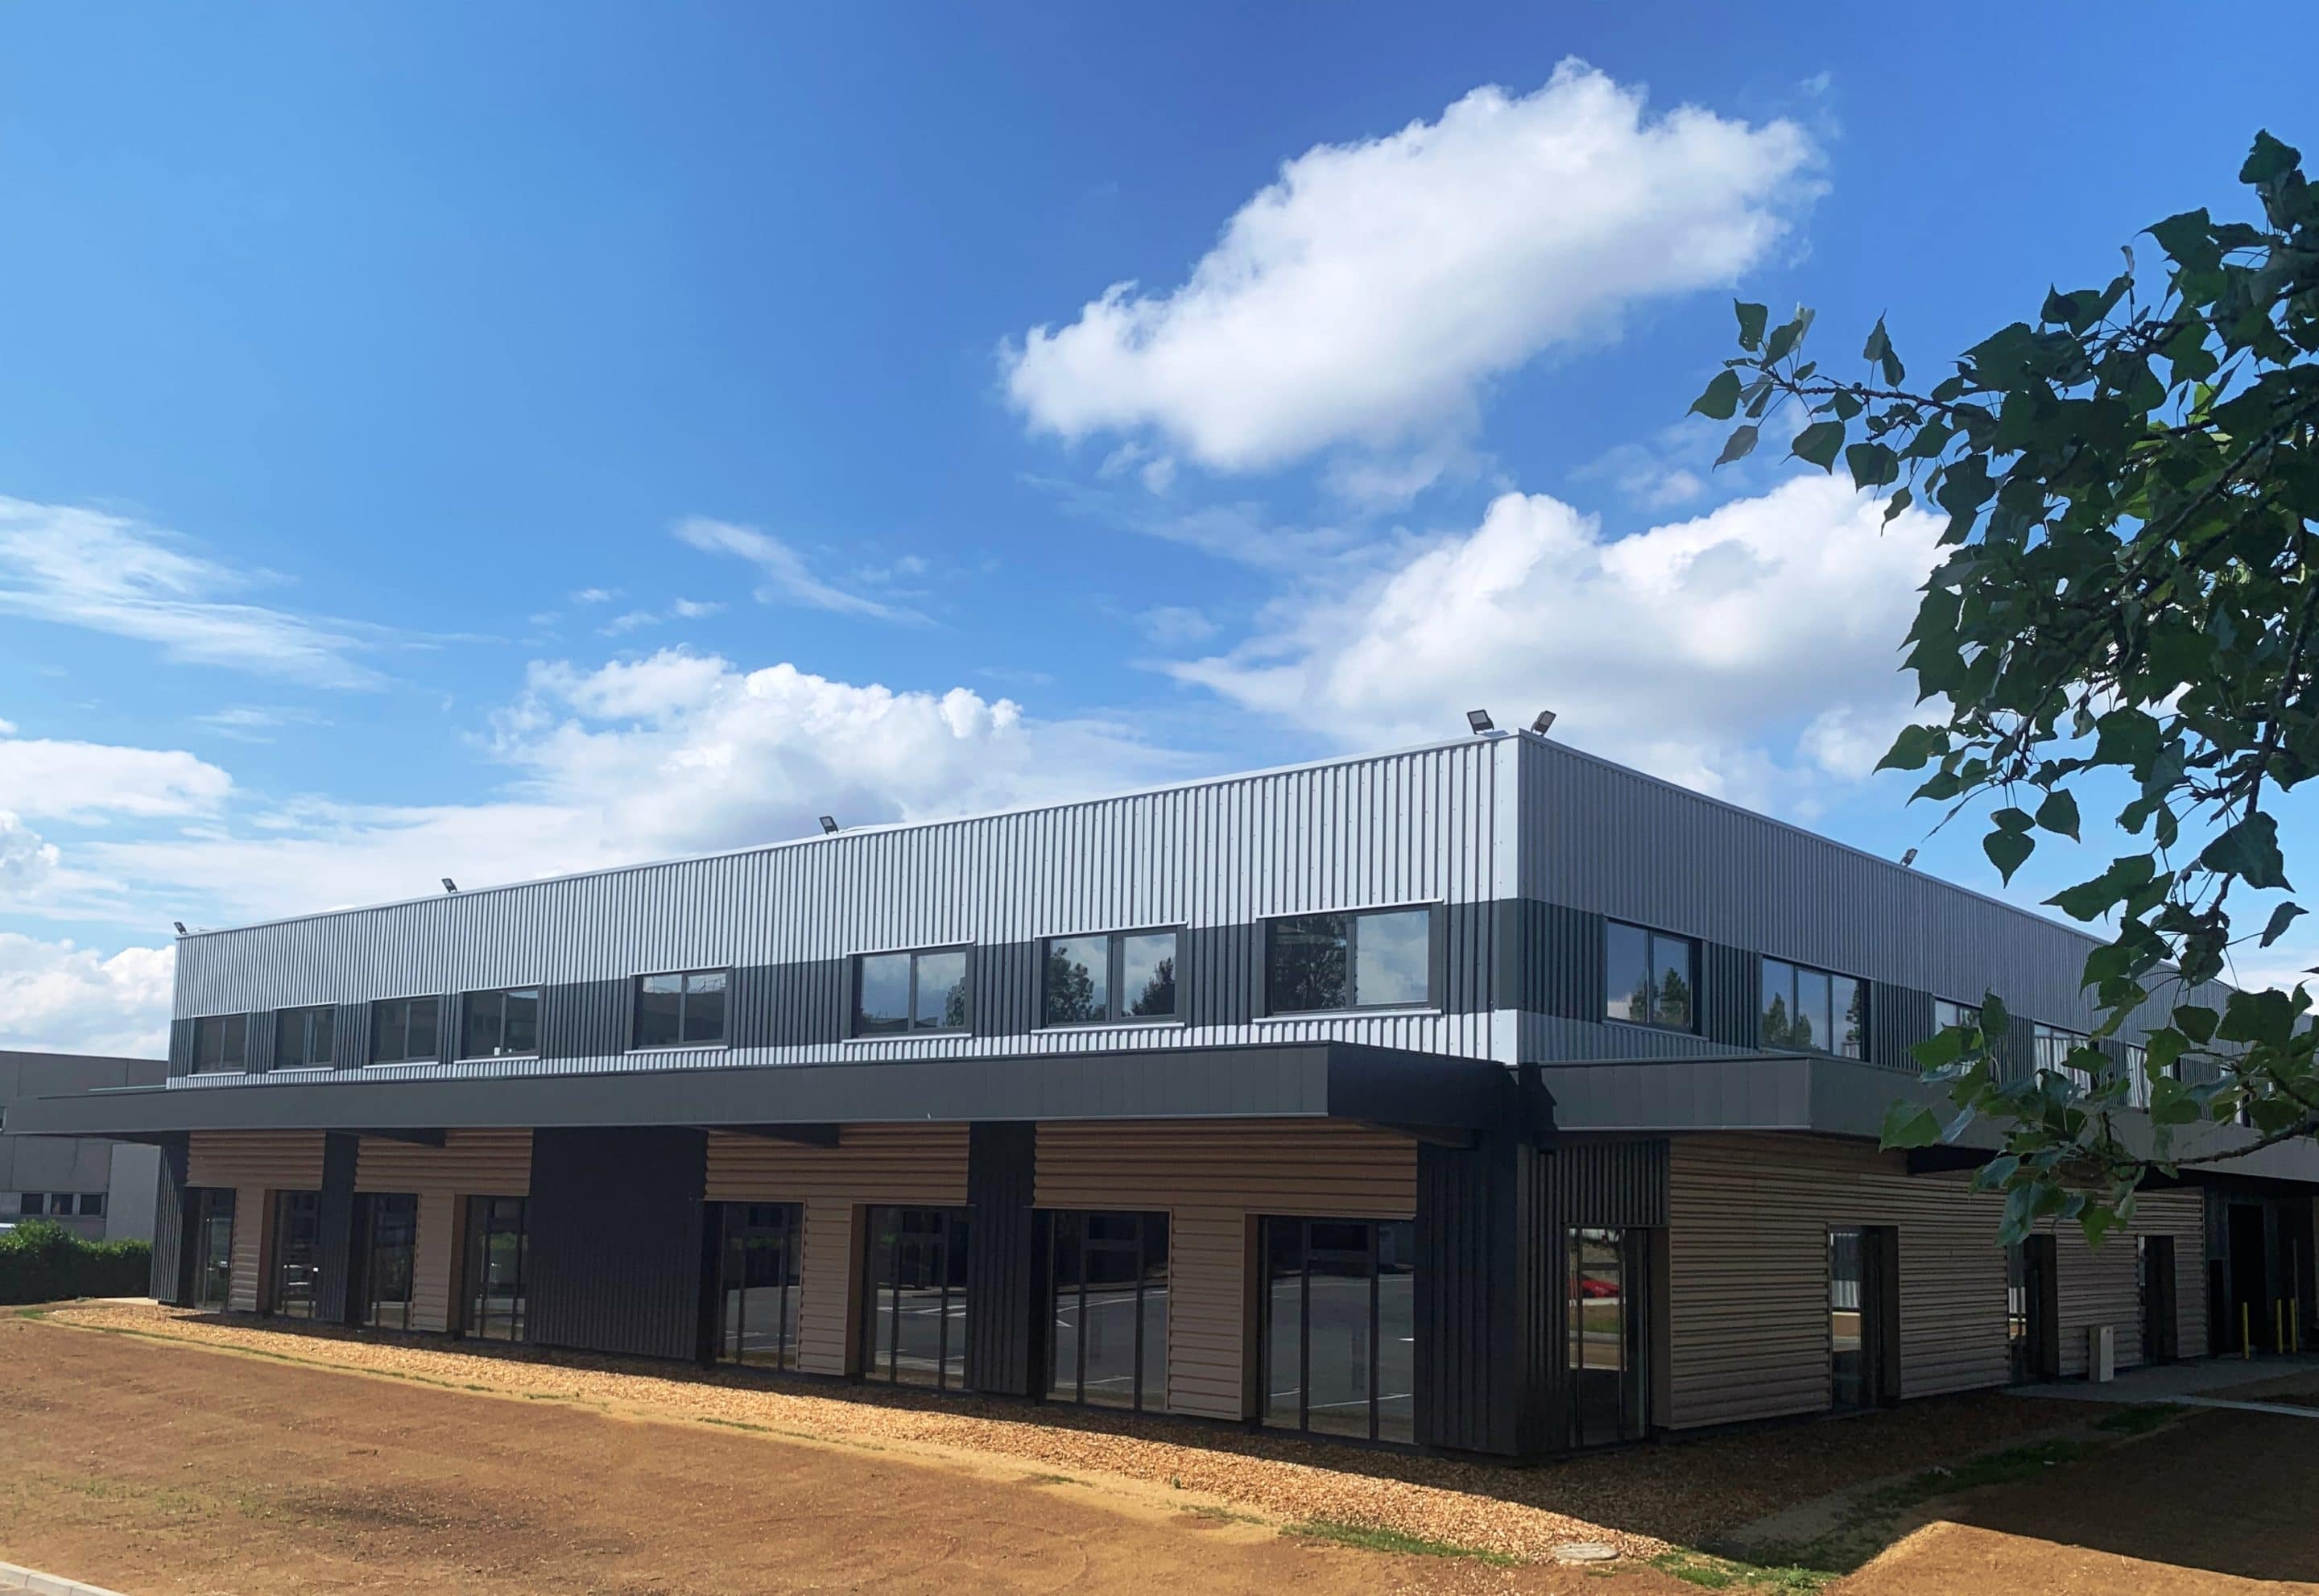 Delivery of Building 1 of the “adPark” business park in CESSON-SEVIGNE